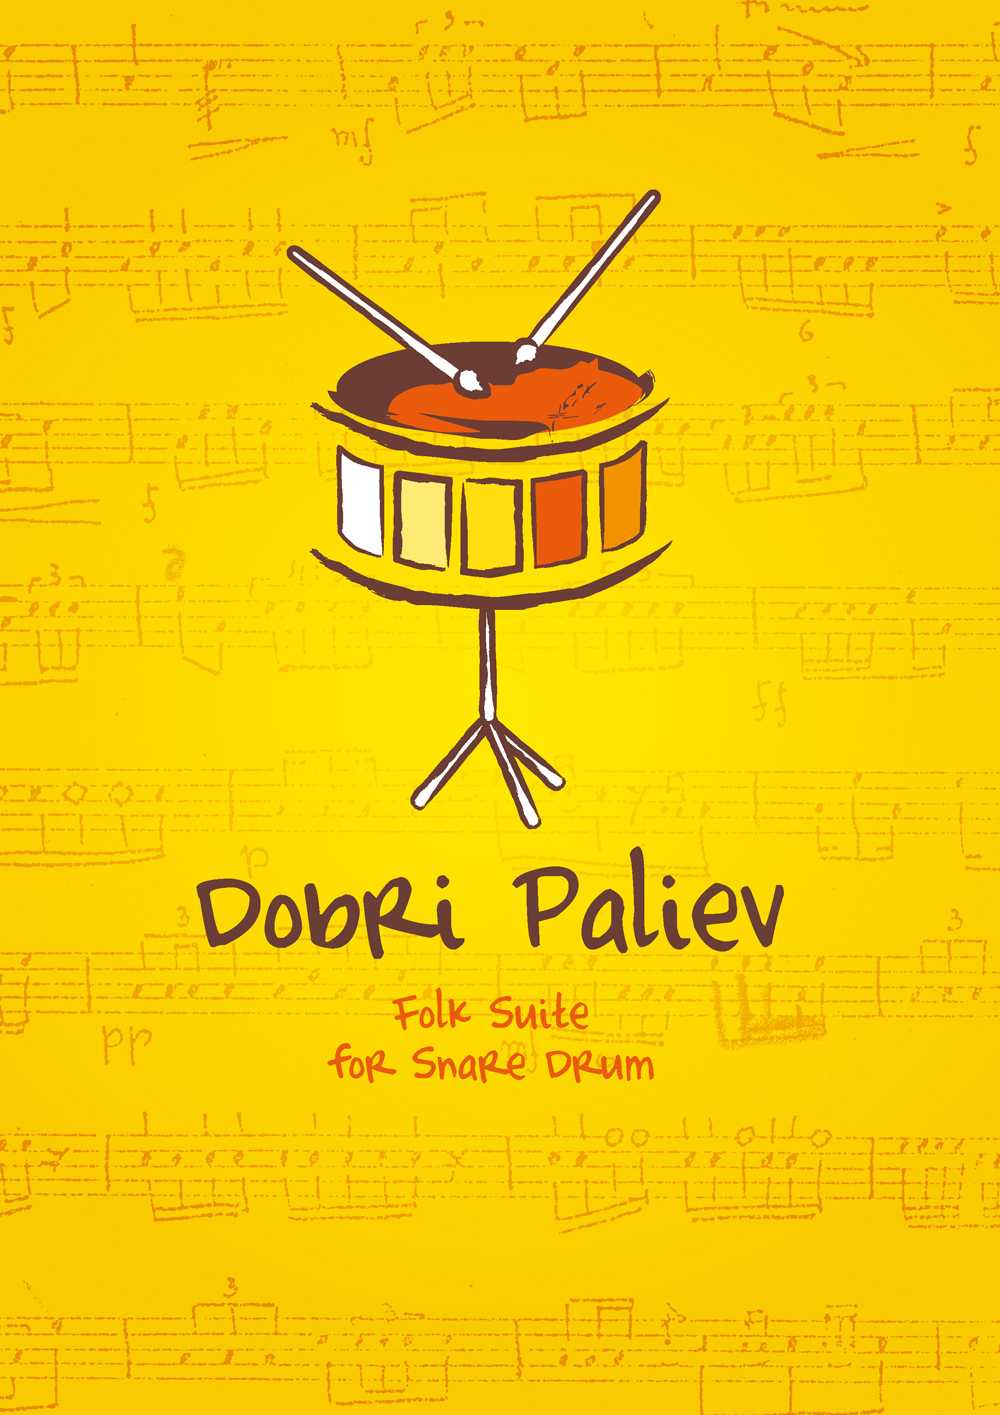 Folk Suite for Snare Drum by Dobri Paliev